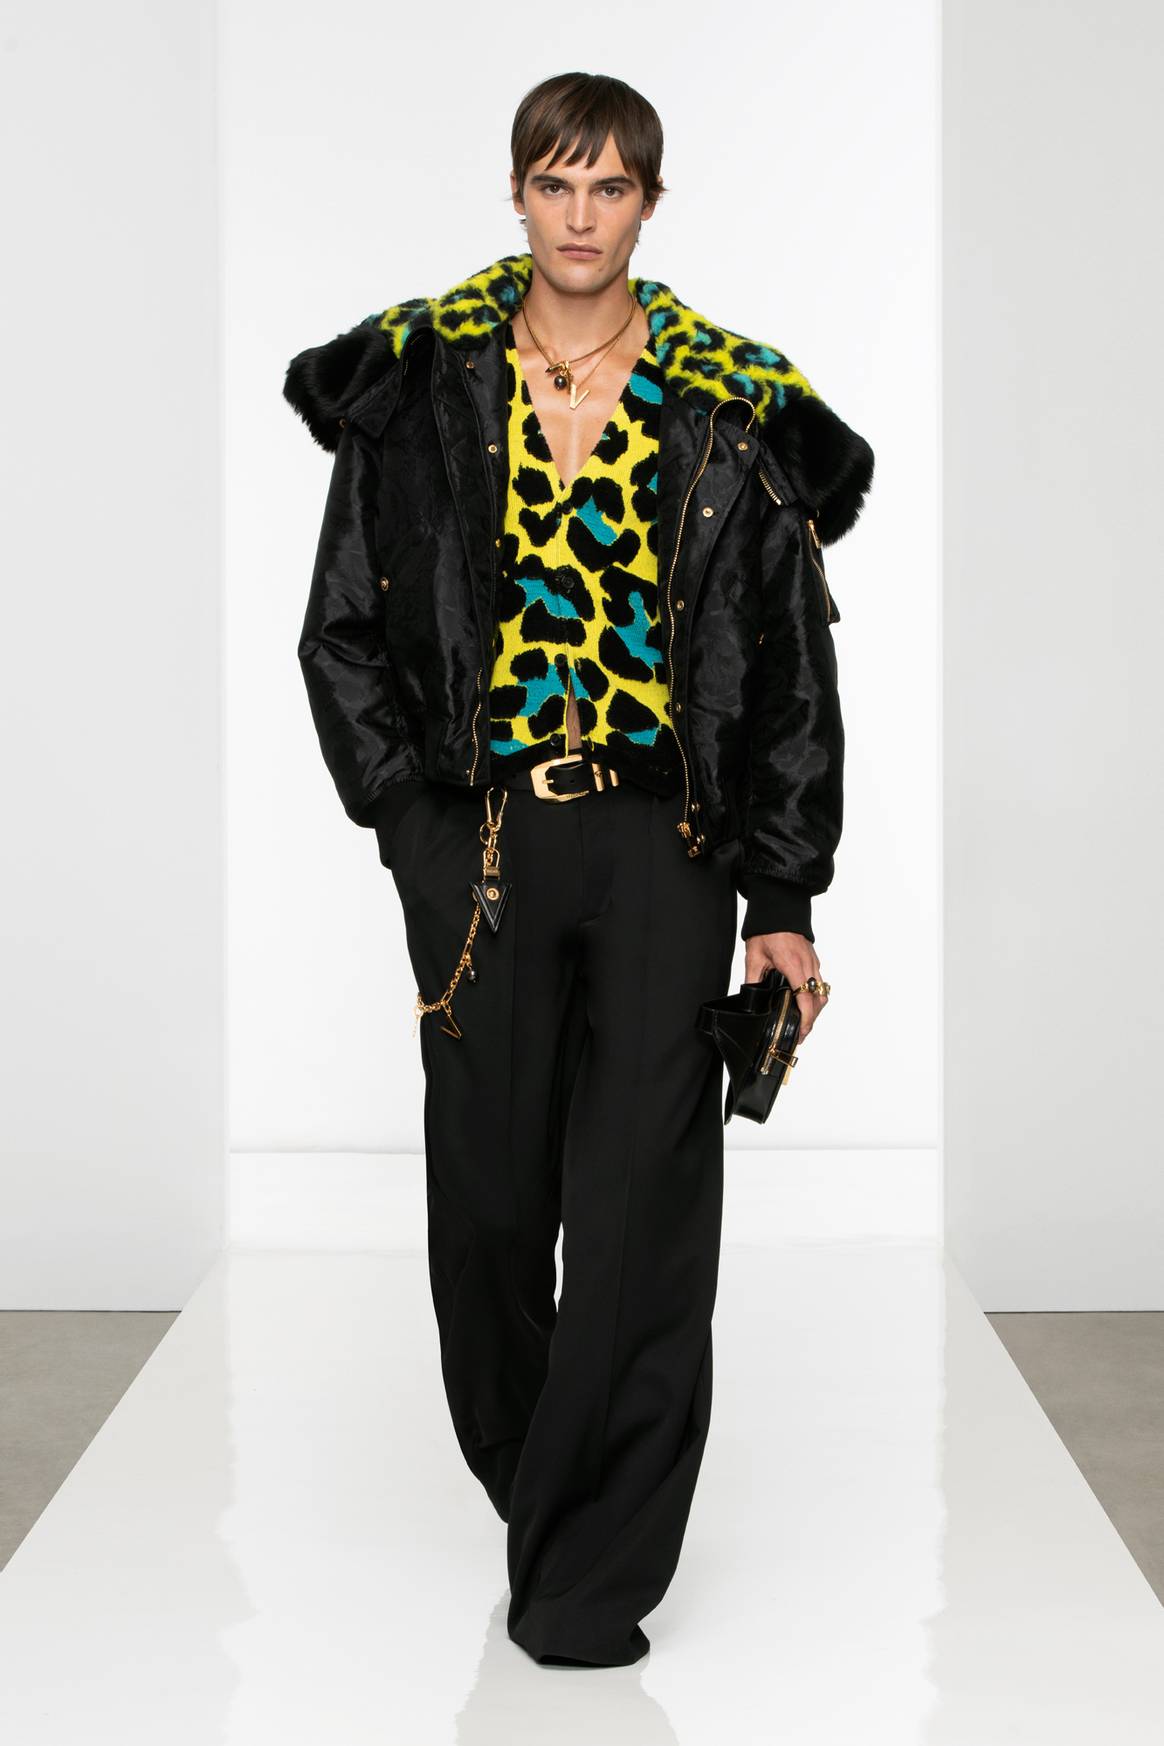 Versace Men, FW22 Collection, courtesy of the brand